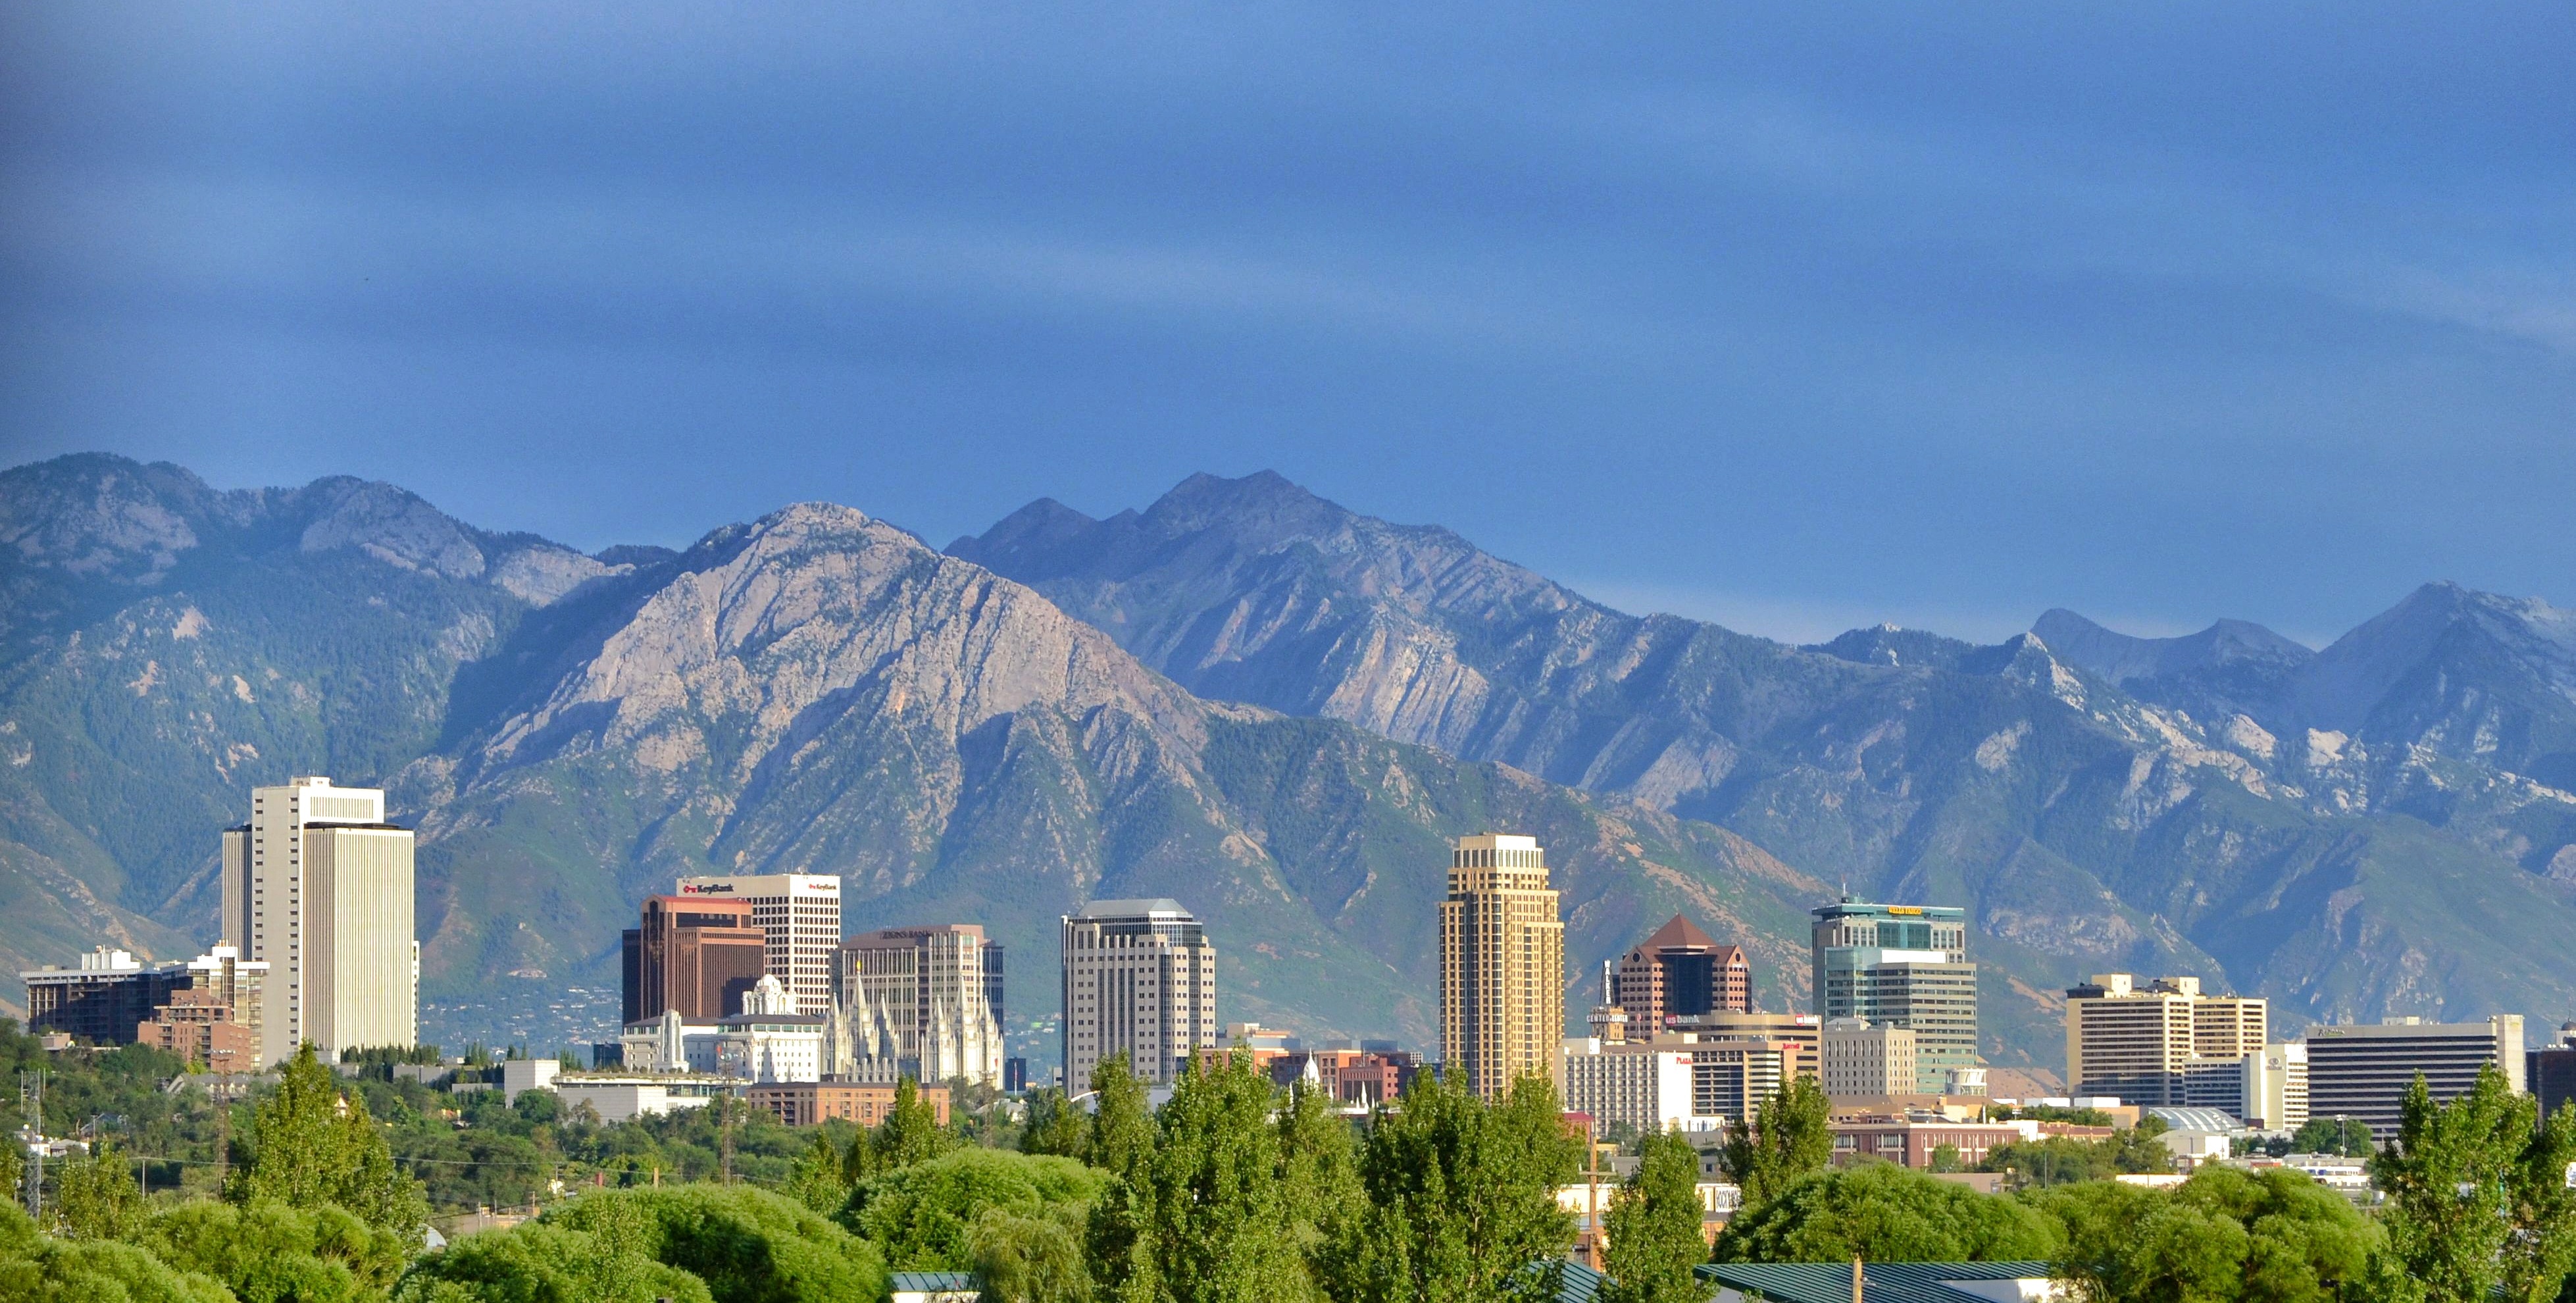 Salt Lake City, often shortened to Salt Lake or SLC, is the capital and most populous city of the U.S. state of Utah. It is the seat of Salt Lake County, the most populous county in the state. With a population of 200,133 in 2020, it is the 117th most populous city in the United States. The city is the core of the Salt Lake City metropolitan area, which had a population of 1,257,936 at the 2020 census. Salt Lake City is further situated within a larger metropolis known as the Salt Lake City–Ogden–Provo Combined Statistical Area, a corridor of contiguous urban and suburban development stretched along a 120-mile (190 km) segment of the Wasatch Front, comprising a population of 2,746,164 (as of 2021 estimates), making it the 22nd largest in the nation. It is also the central core and the larger of only two major urban areas located within the Great Basin (the other being Reno, Nevada).
Salt Lake City was founded on July 24, 1847, by early pioneer settlers led by Brigham Young who were seeking to escape persecution they had experienced while living farther east. The Mormon pioneers, as they would come to be known, entered a semi-arid valley and immediately began planning and building an extensive irrigation network which could feed the population and foster future growth. Salt Lake City's street grid system is based on a standard compass grid plan, with the southeast corner of Temple Square (the area containing the Salt Lake Temple in downtown Salt Lake City) serving as the origin of the Salt Lake meridian. Owing to its proximity to the Great Salt Lake, the city was originally named Great Salt Lake City. In 1868, the word "Great" was dropped from the city's name.Immigration of international members of the Church of Jesus Christ of Latter-day Saints (LDS Church), mining booms, and the construction of the first transcontinental railroad initially brought economic growth, and the city was nicknamed "The Crossroads of the West". It was traversed by the Lincoln Highway, the first transcontinental highway, in 1913. Two major cross-country freeways, I-15 and I-80, now intersect in the city. The city also has a belt route, I-215.
Salt Lake City has developed a strong tourist industry based primarily on skiing, outdoor recreation, and religious tourism. It hosted the 2002 Winter Olympics and is a candidate city for the 2030 Winter Olympics. It is known for its politically liberal culture, which stands in contrast with the rest of the state's highly conservative leanings. It is home to a significant LGBT community and hosts the annual Utah Pride Festival. It is the industrial banking center of the United States. Salt Lake City and the surrounding area are also the location of several institutions of higher education including the state's flagship research school, the University of Utah. Sustained drought in Utah has more recently strained Salt Lake City's water security and caused the Great Salt Lake level to drop to record low levels, and has impacted the local and state economy.